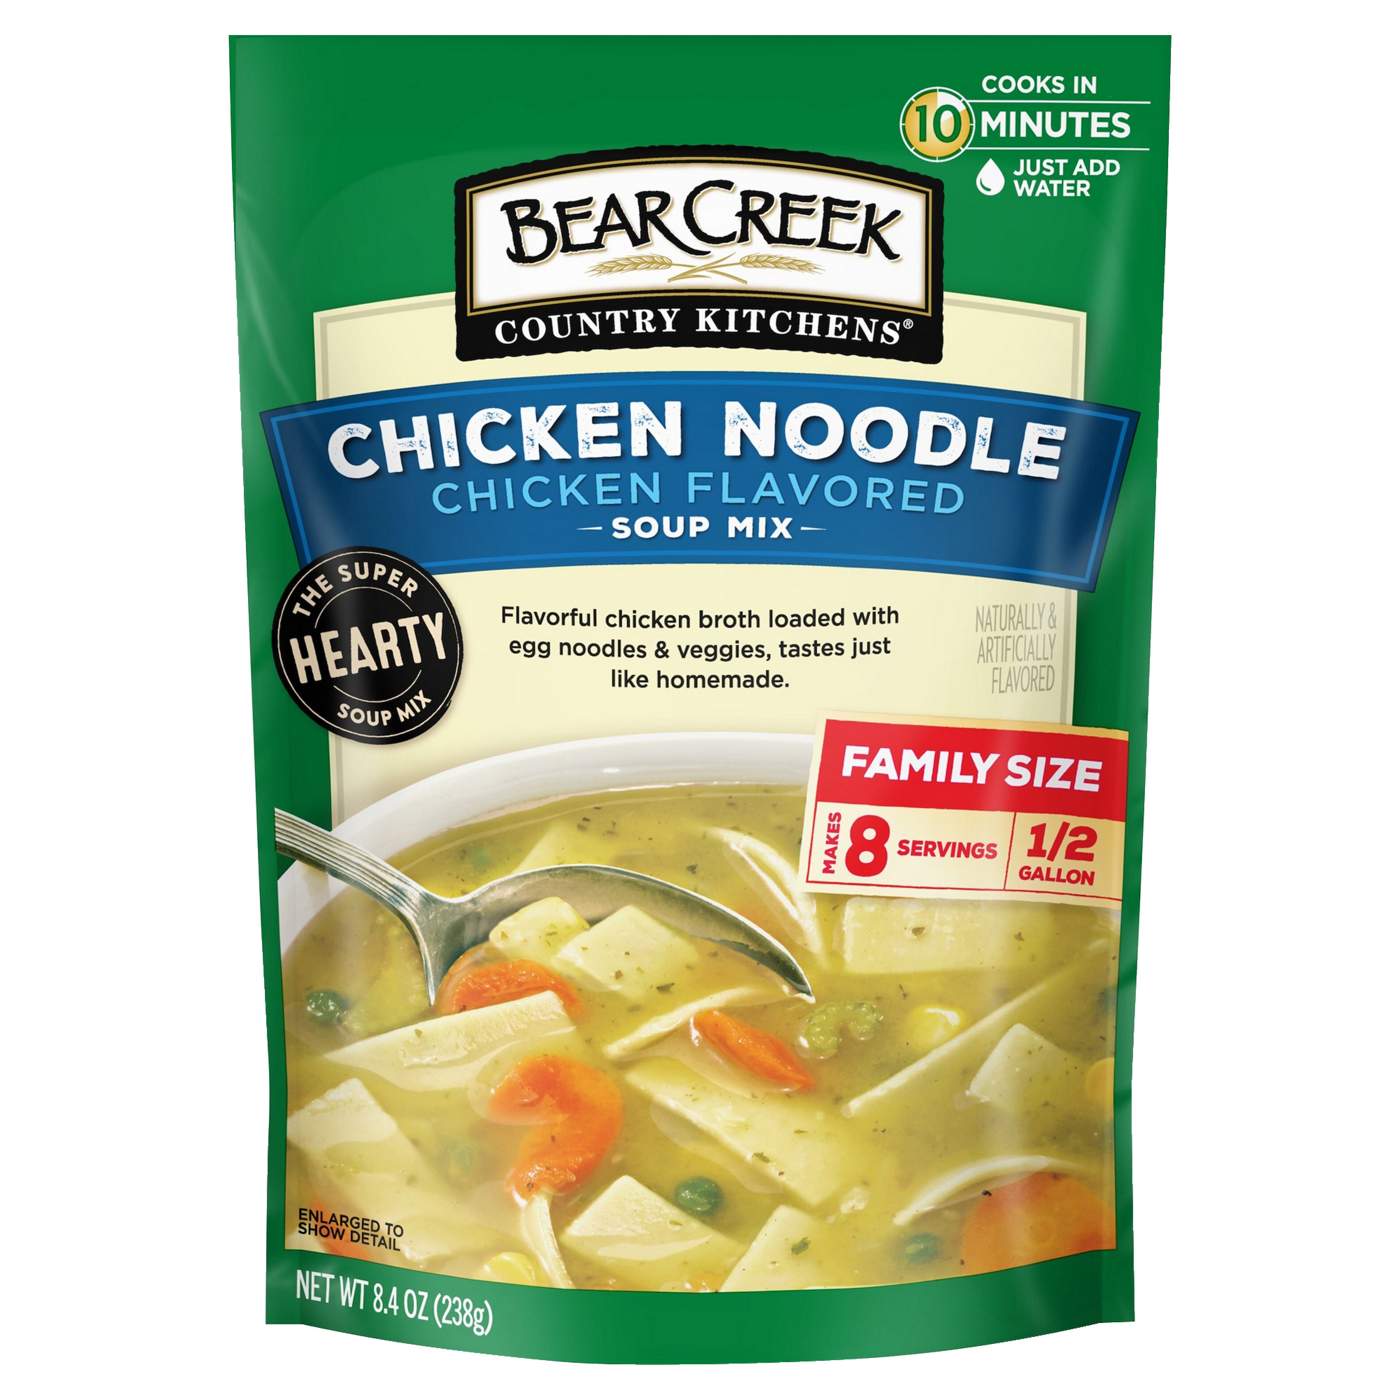 Bear Creek Chicken Noodle Chicken Flavored Soup Mix; image 1 of 3